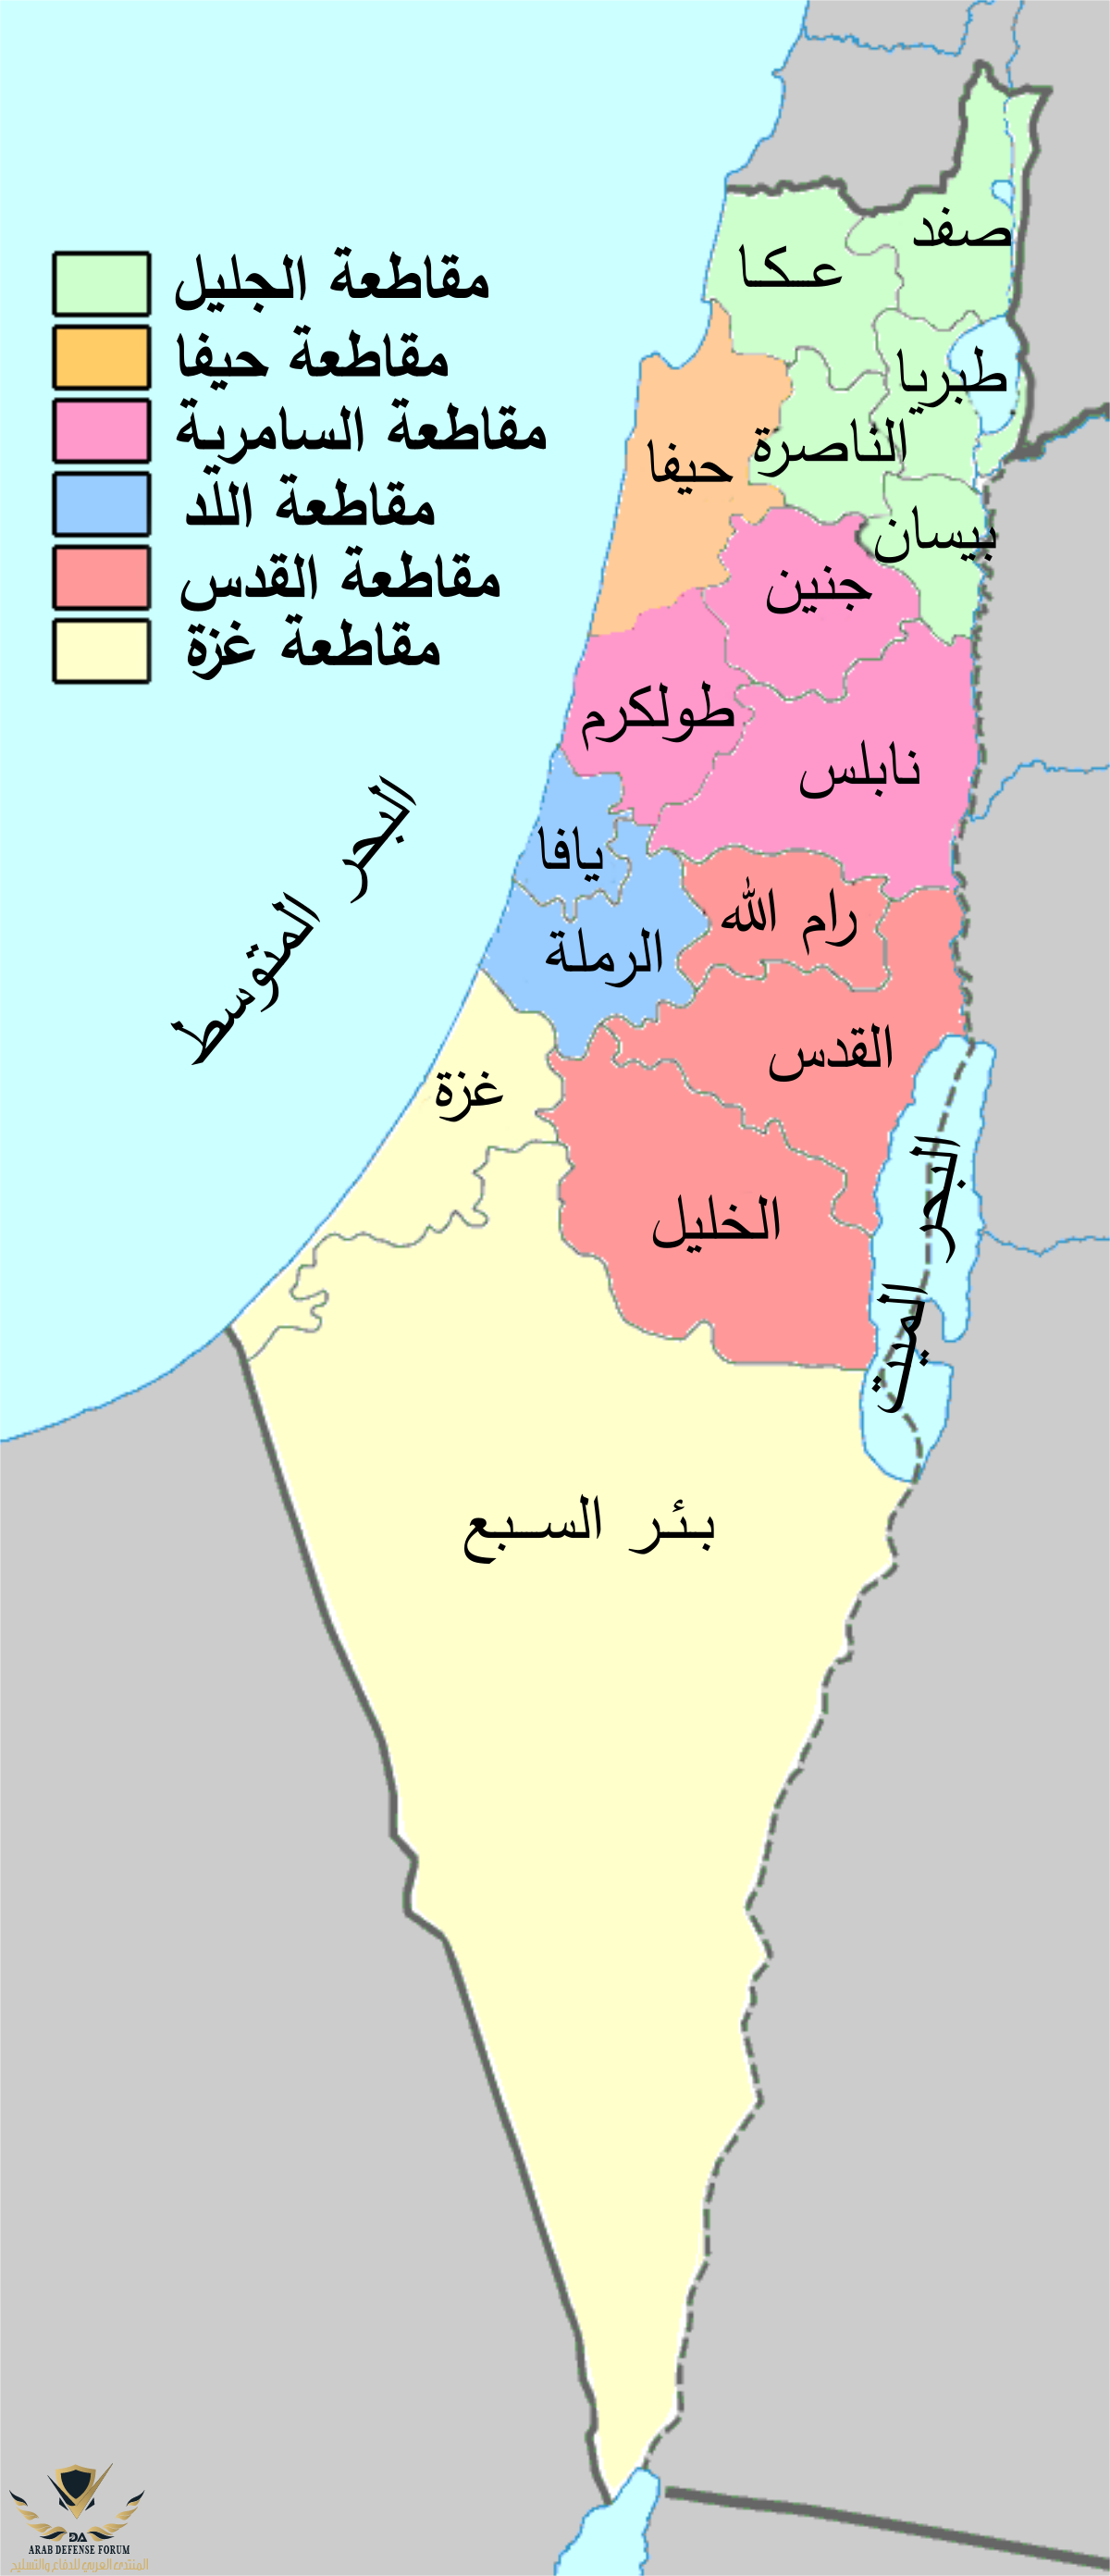 1200px-Mandatory_Palestine_1945_subdistricts_and_districts-ar.svg.png